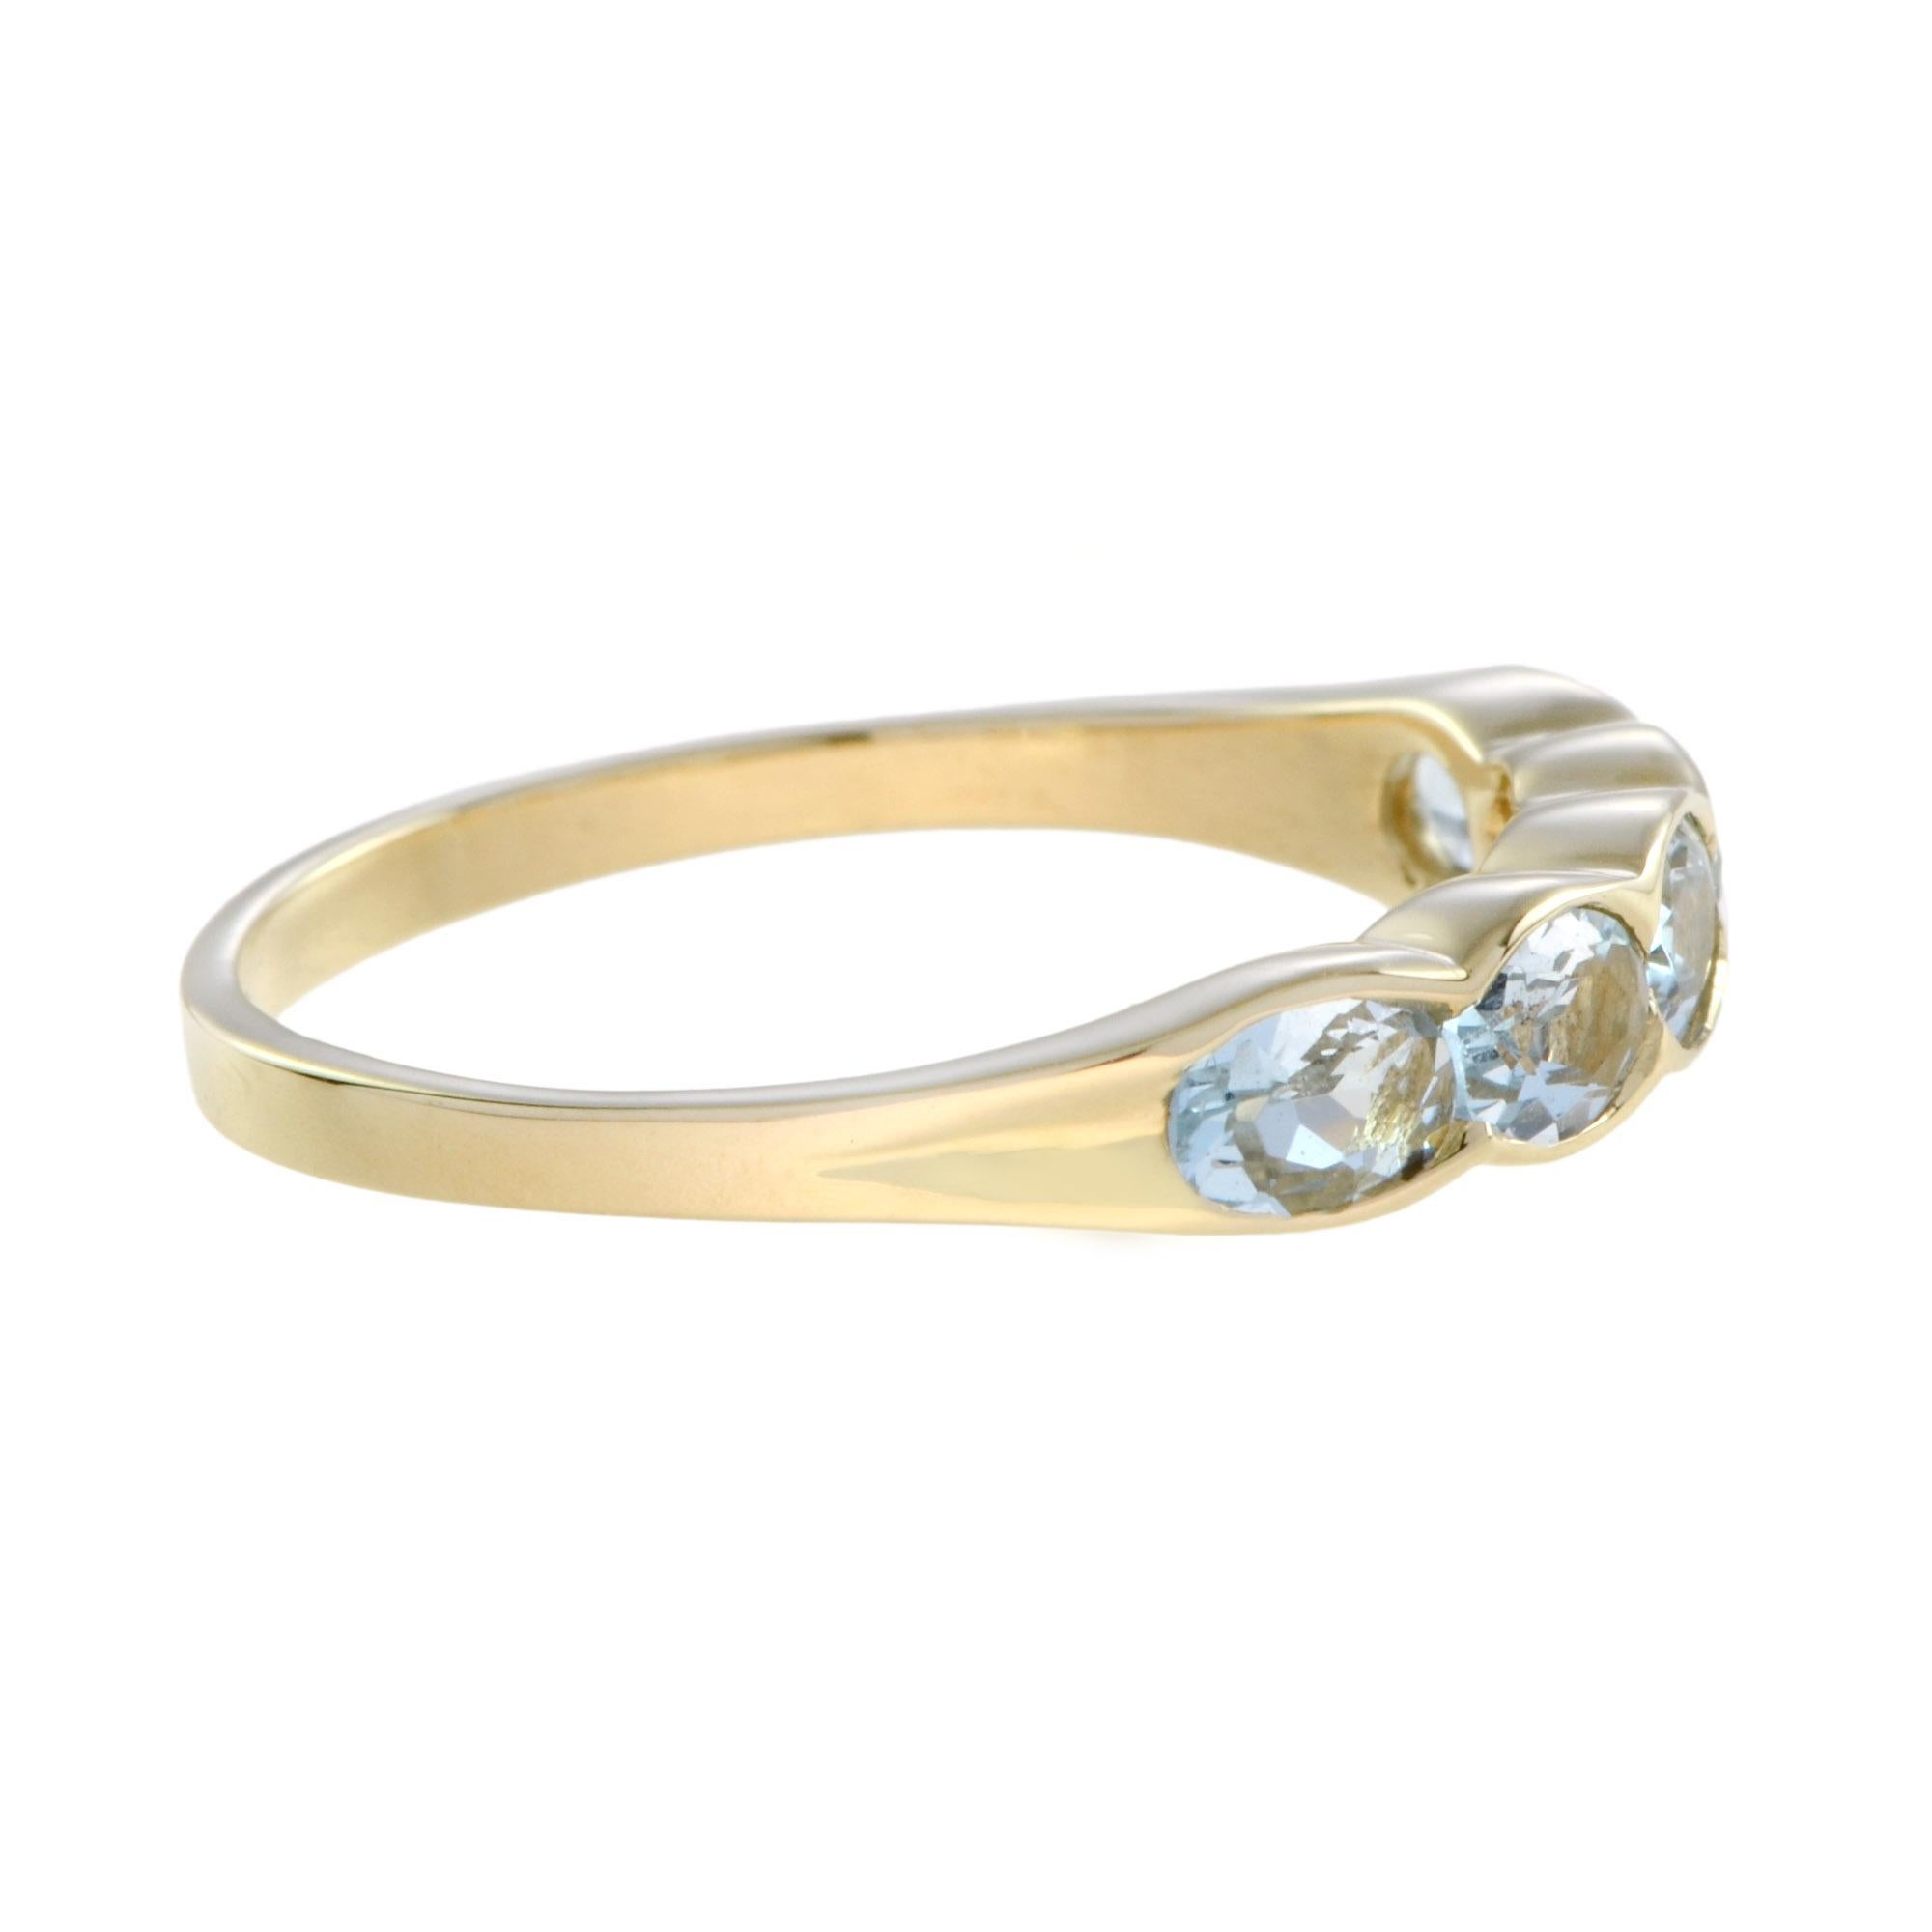 For Sale:  Vintage Style Aquamarine Five Stone Ring in 14K Yellow Gold 3